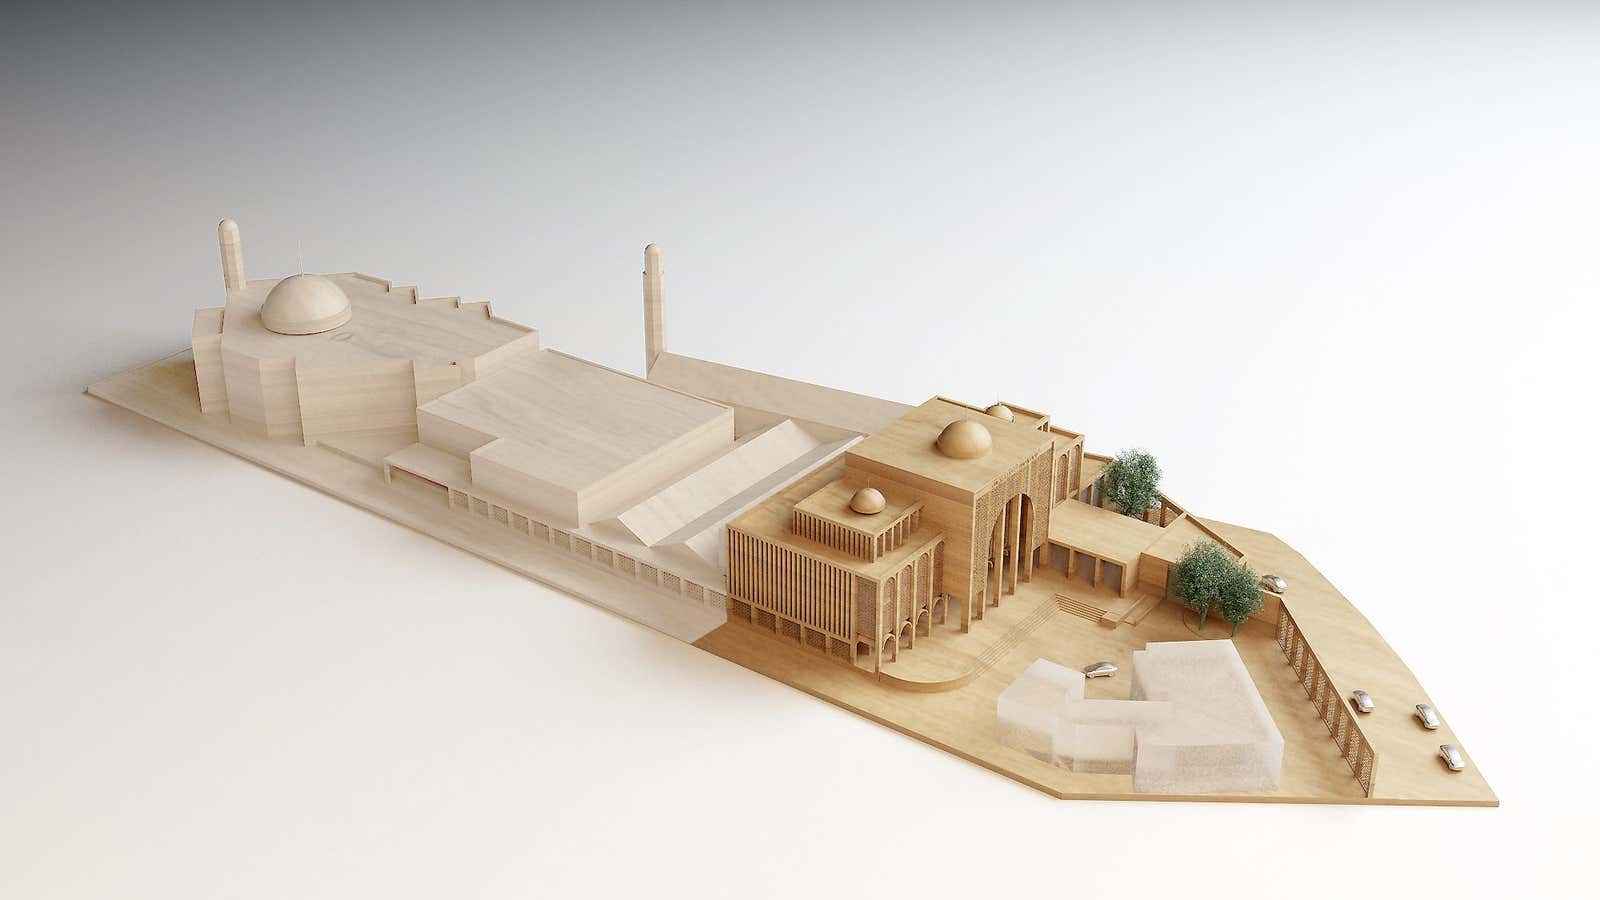 A model of the Baitul Futuh redesign, showing the colonnaded front with its porous screens.